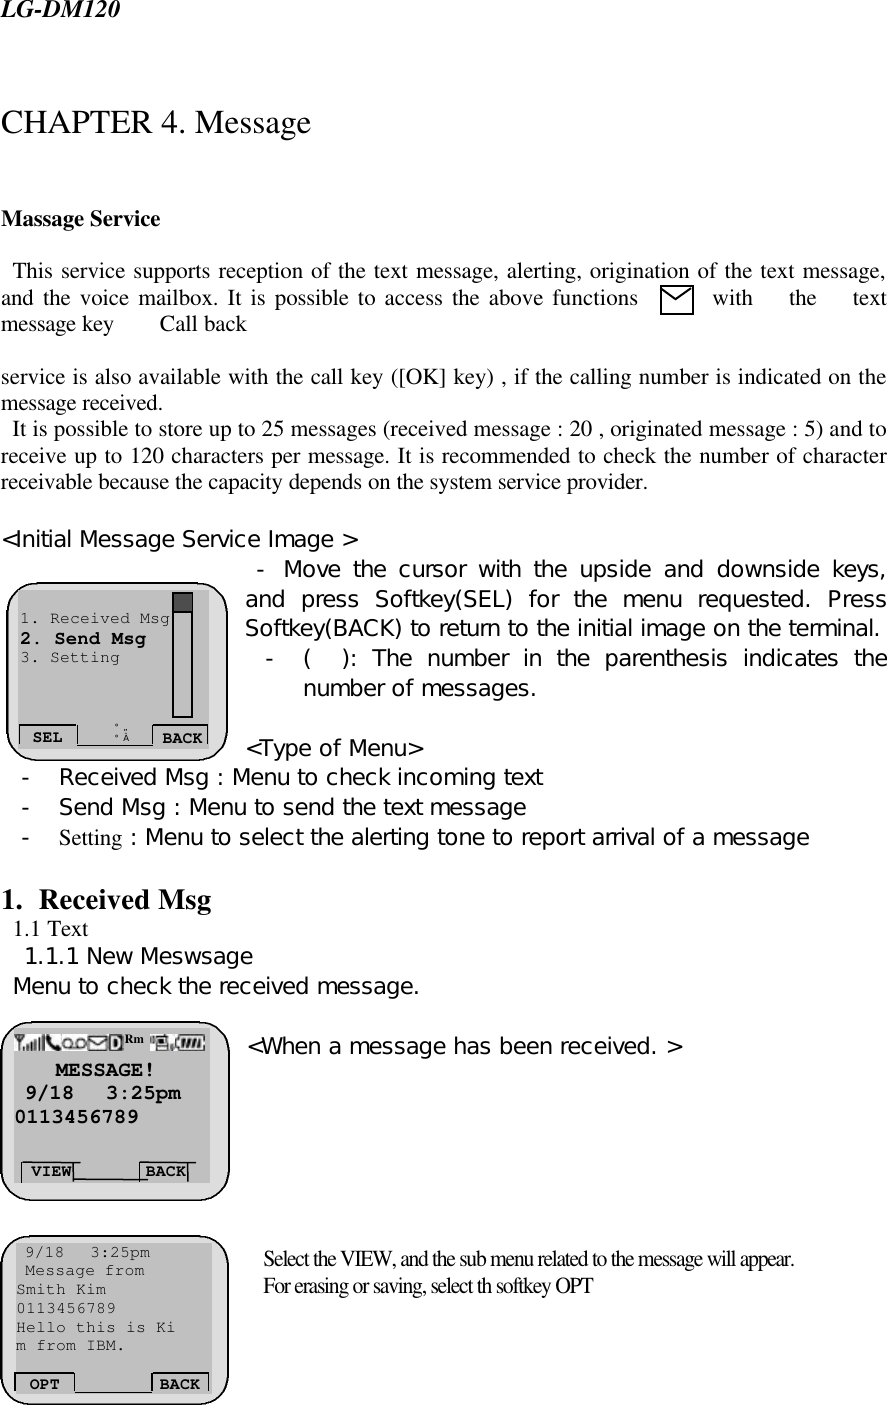  LG-DM120  CHAPTER 4. Message   Massage Service    This service supports reception of the text message, alerting, origination of the text message, and the voice mailbox. It is possible to access the above functions  with the text message key    Call back   service is also available with the call key ([OK] key) , if the calling number is indicated on the message received.   It is possible to store up to 25 messages (received message : 20 , originated message : 5) and to receive up to 120 characters per message. It is recommended to check the number of character receivable because the capacity depends on the system service provider.   &lt;Initial Message Service Image &gt;  - Move the cursor with the upside and downside keys, and press Softkey(SEL) for the menu requested. Press Softkey(BACK) to return to the initial image on the terminal. - (  ): The number in the parenthesis indicates the number of messages.   &lt;Type of Menu&gt; - Received Msg : Menu to check incoming text    - Send Msg : Menu to send the text message  - Setting : Menu to select the alerting tone to report arrival of a message     1. Received Msg   1.1 Text   1.1.1 New Meswsage  Menu to check the received message.   &lt;When a message has been received. &gt;        Select the VIEW, and the sub menu related to the message will appear.  For erasing or saving, select th softkey OPT  SEL BACK ¡ã ¡å 1. Received Msg 2. Send Msg 3. Setting     MESSAGE!  9/18   3:25pm 0113456789 VIEW BACK Rm  9/18   3:25pm  Message from Smith Kim 0113456789 Hello this is Ki m from IBM.   OPT BACK 